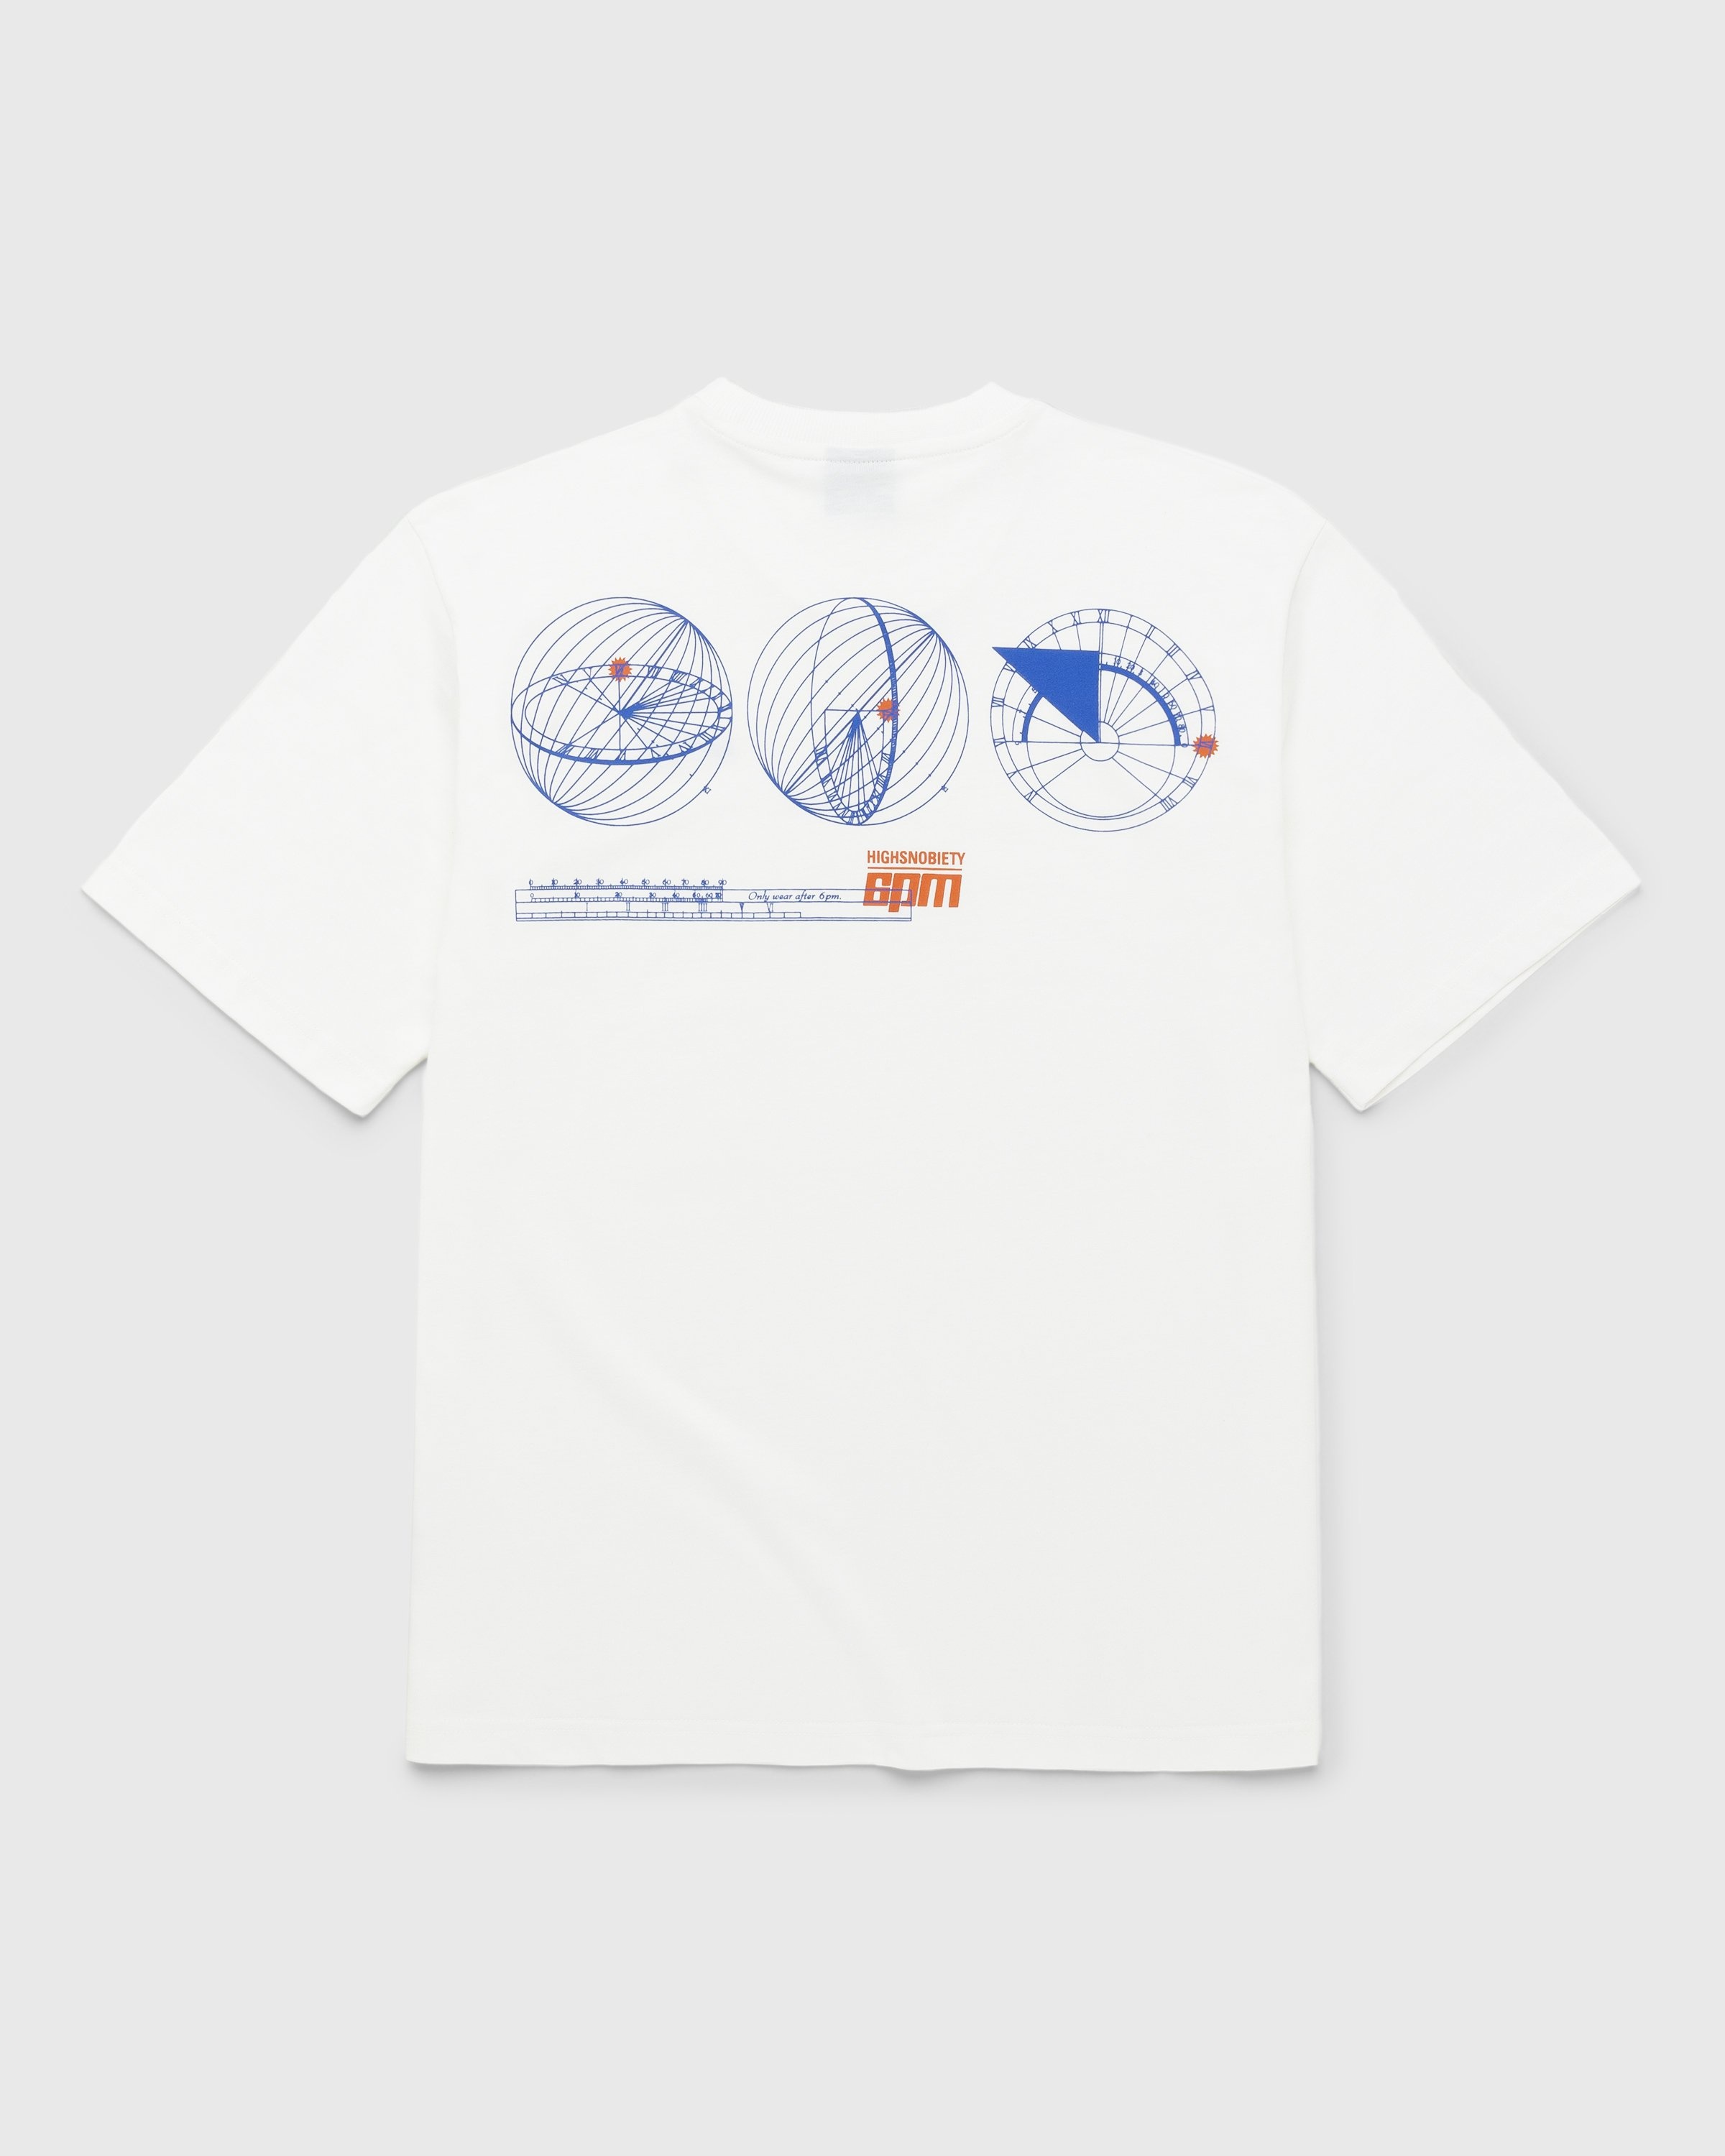 6PM x Highsnobiety – BERLIN, BERLIN 3 Only Wear After 6PM T-Shirt White - T-Shirts - White - Image 1